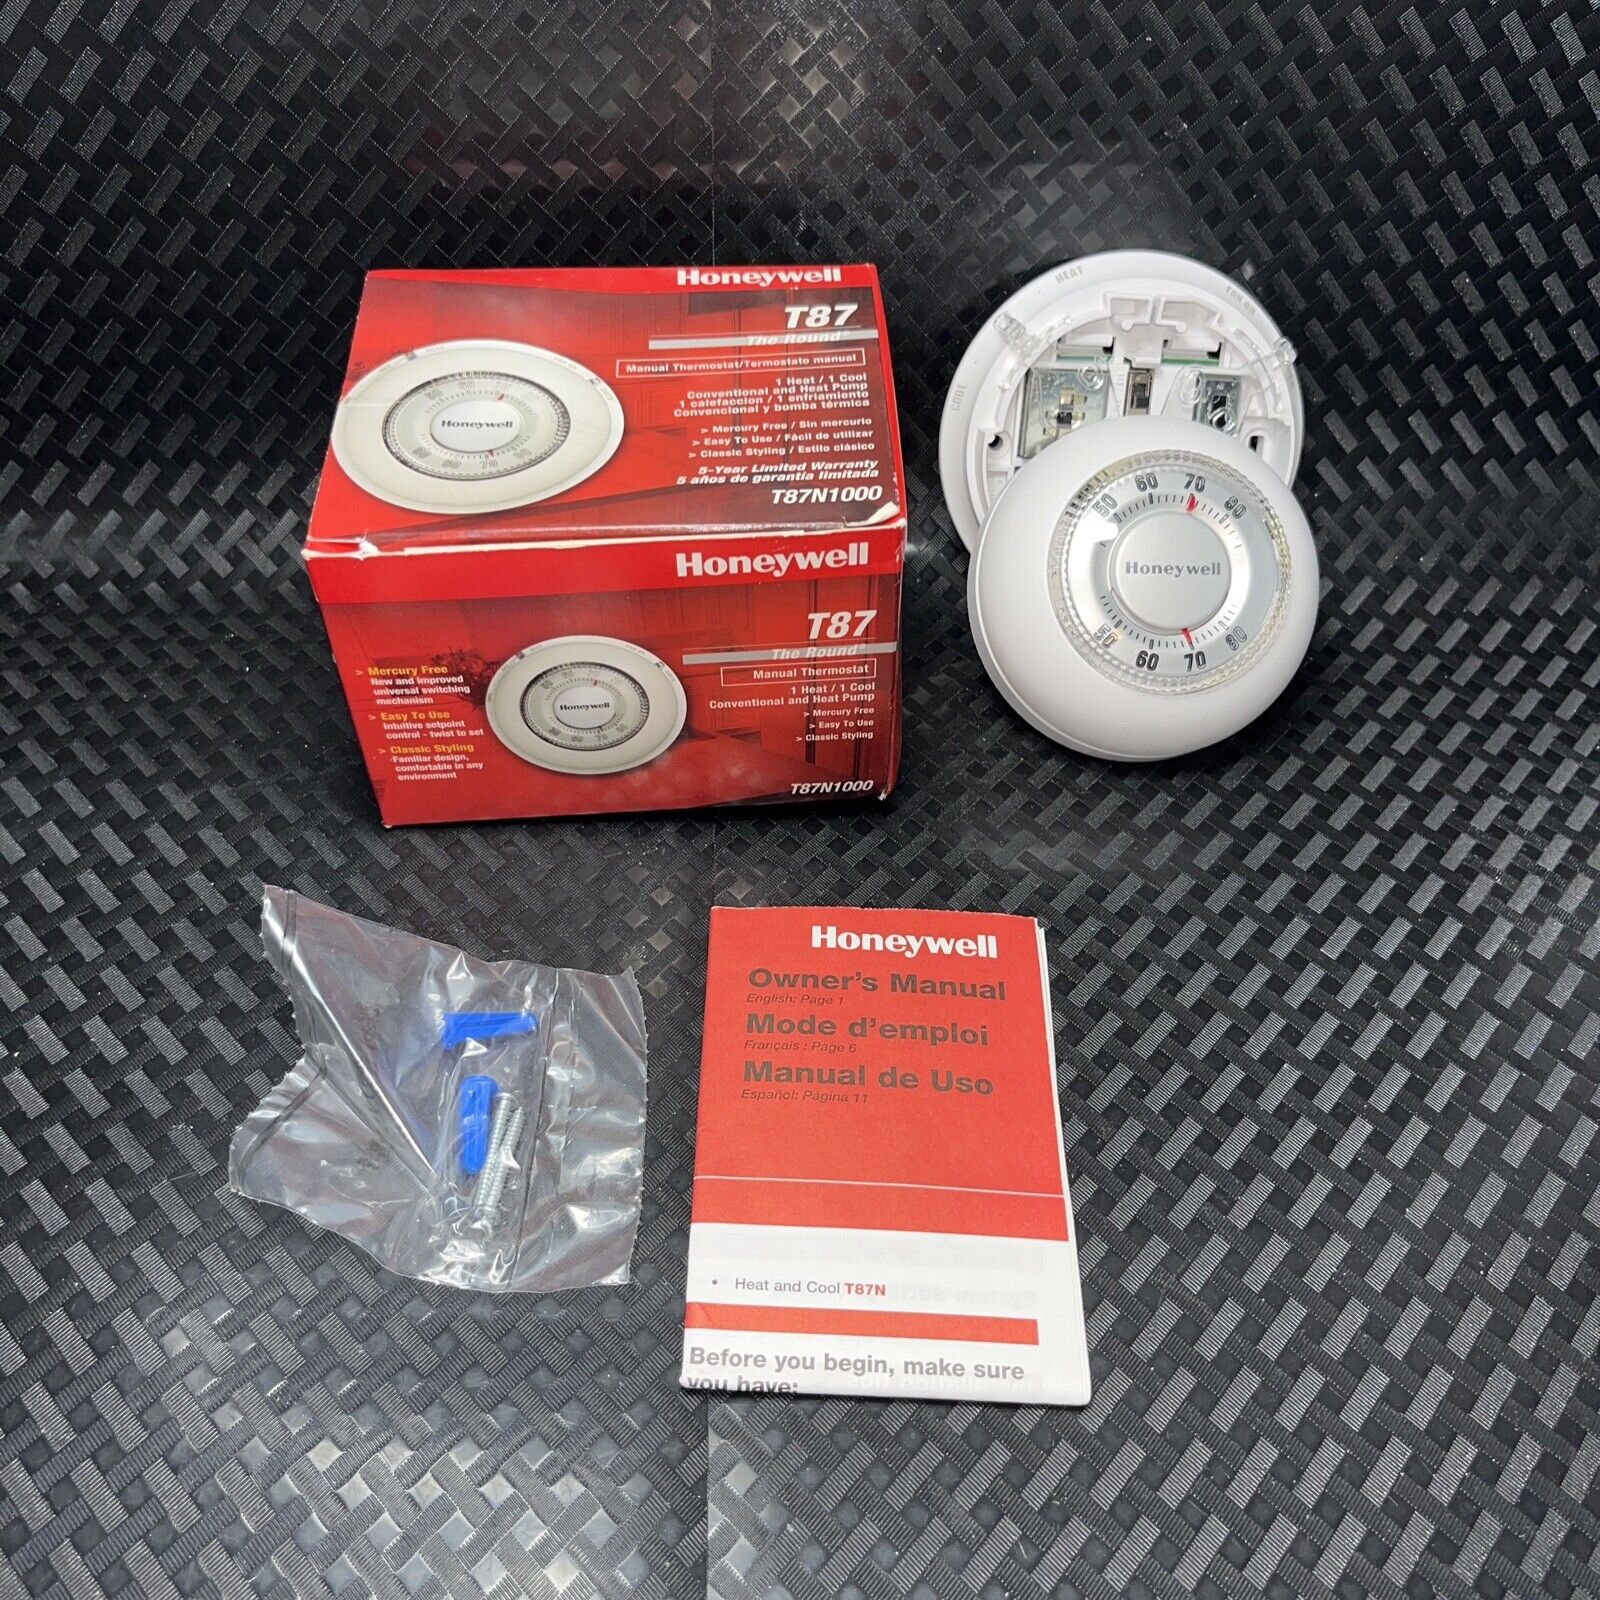 Honeywell The Round Non-Programmable, Mechanical Thermostat T87N1000